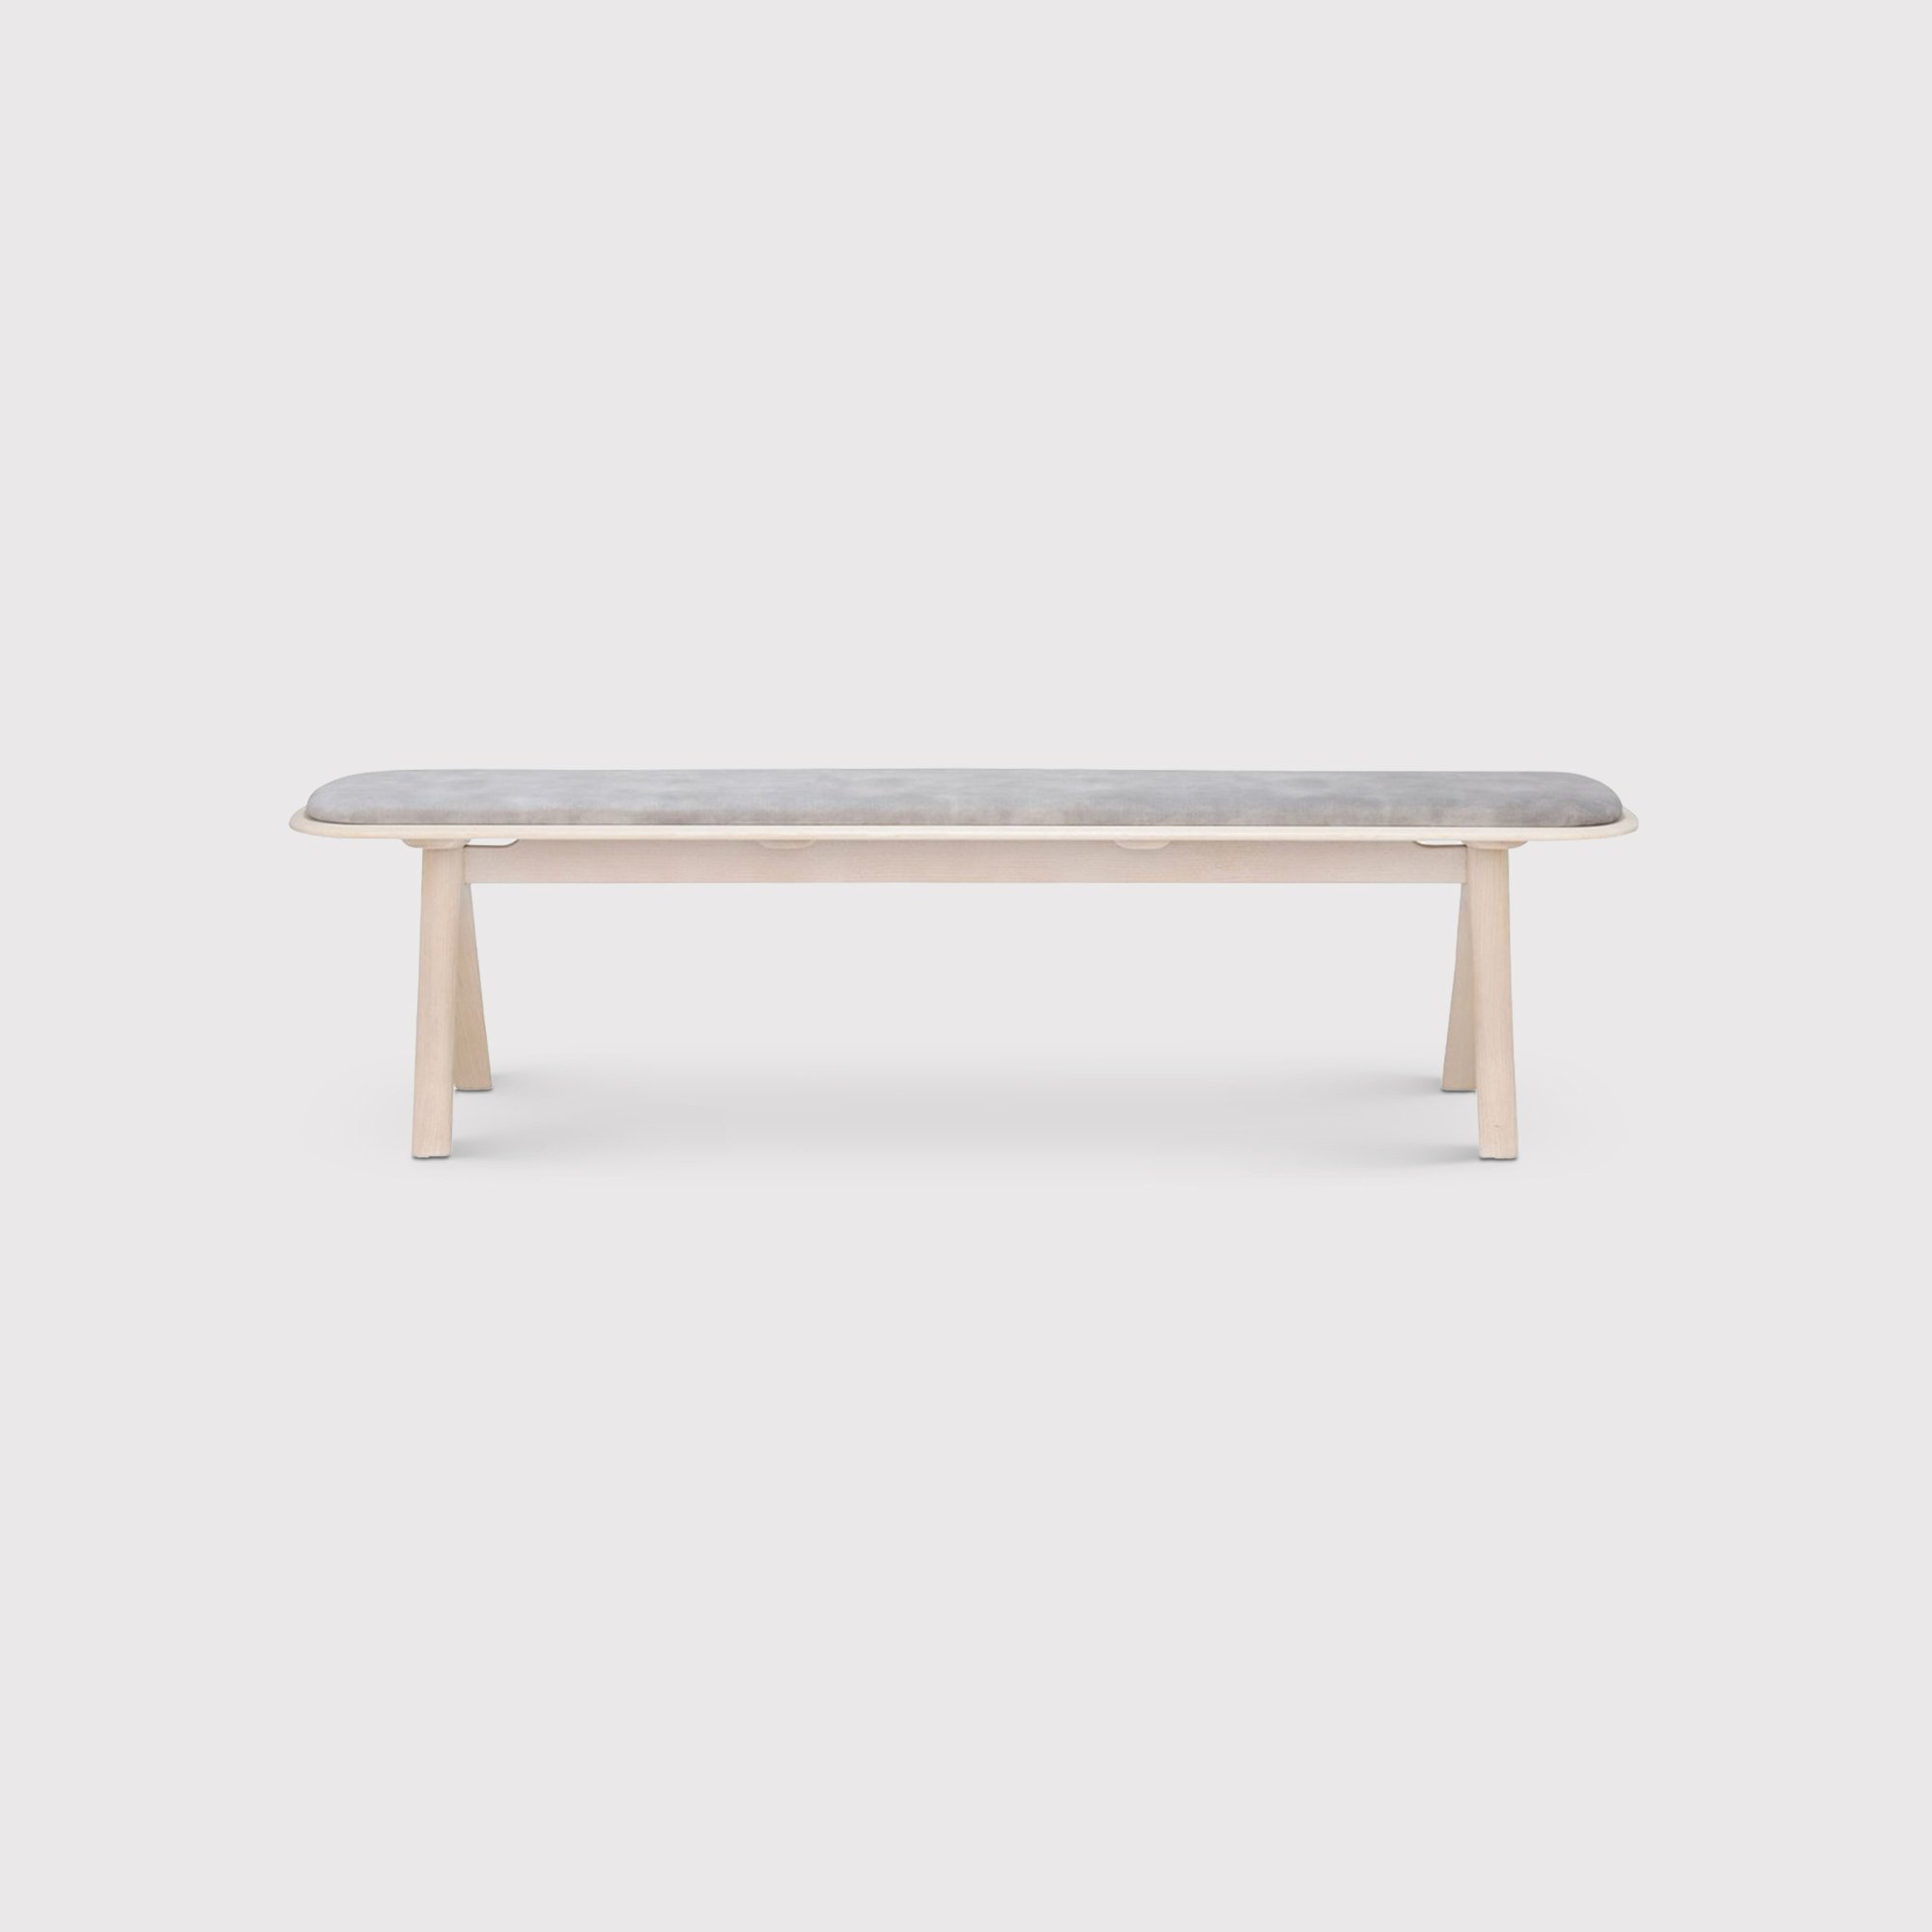 Ercol Corso Upholstered Bench, Neutral Wood | Barker & Stonehouse